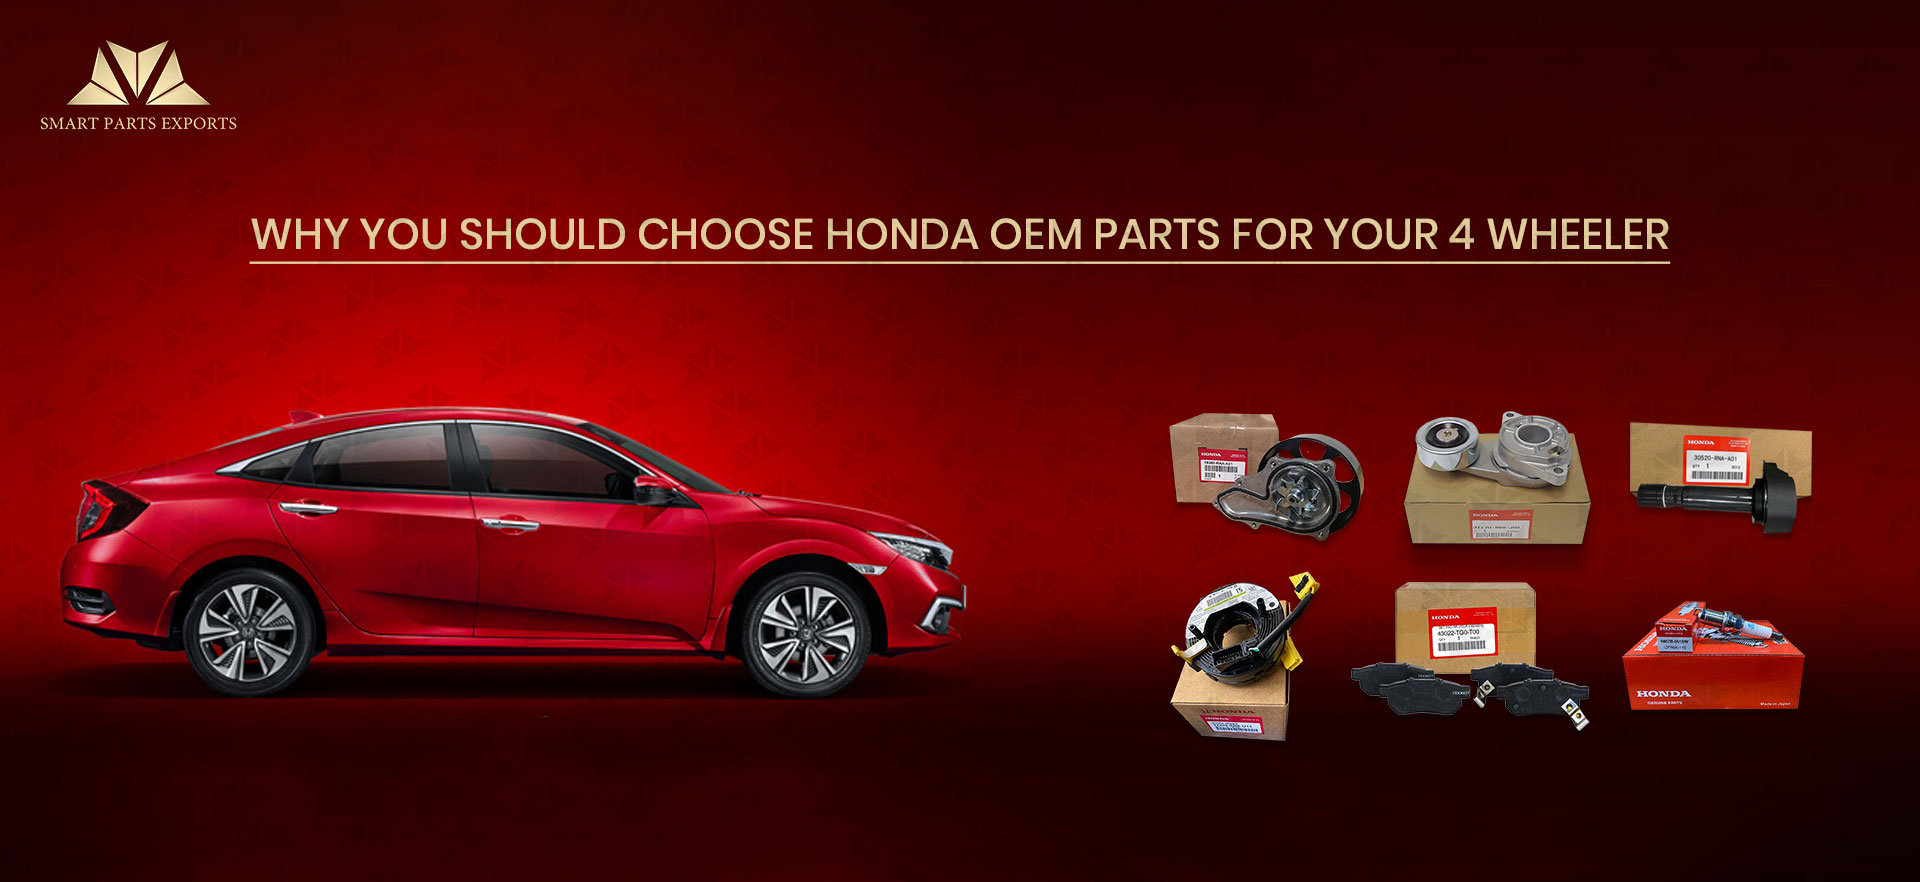 Why You Should Choose Honda OEM Parts for Your 4 Wheeler